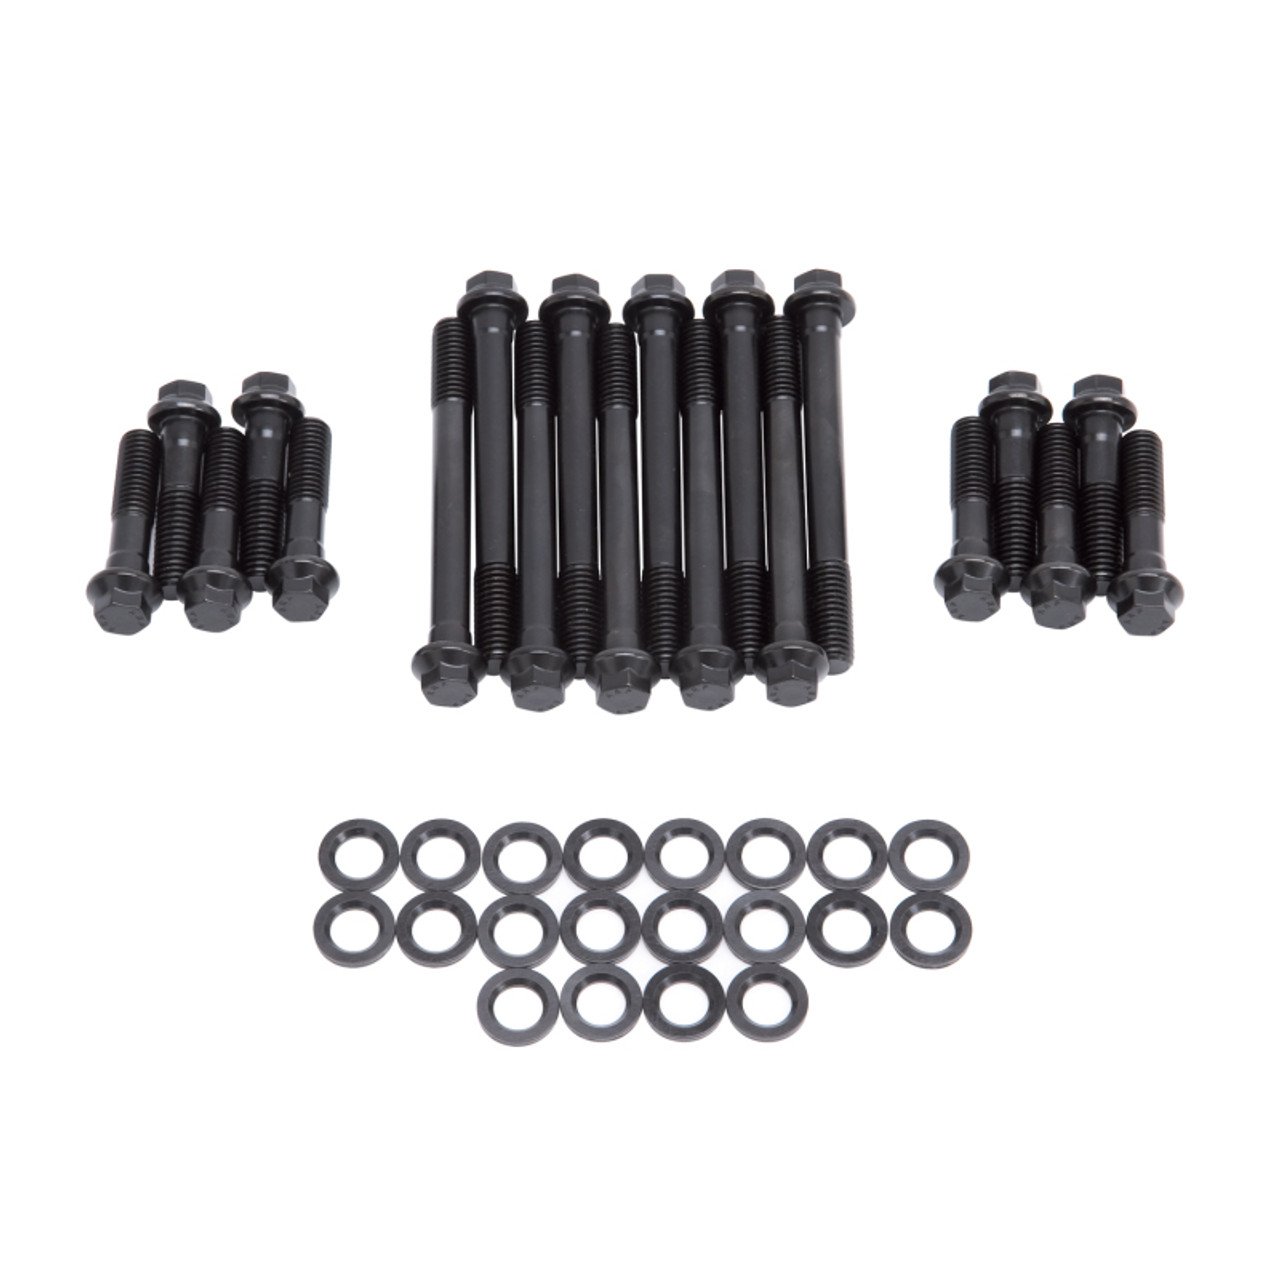 Edelbrock Head Bolt Kit for Perf RPM Heads for 5 2L/5 8L Magnum Engines - 85772 Photo - Primary